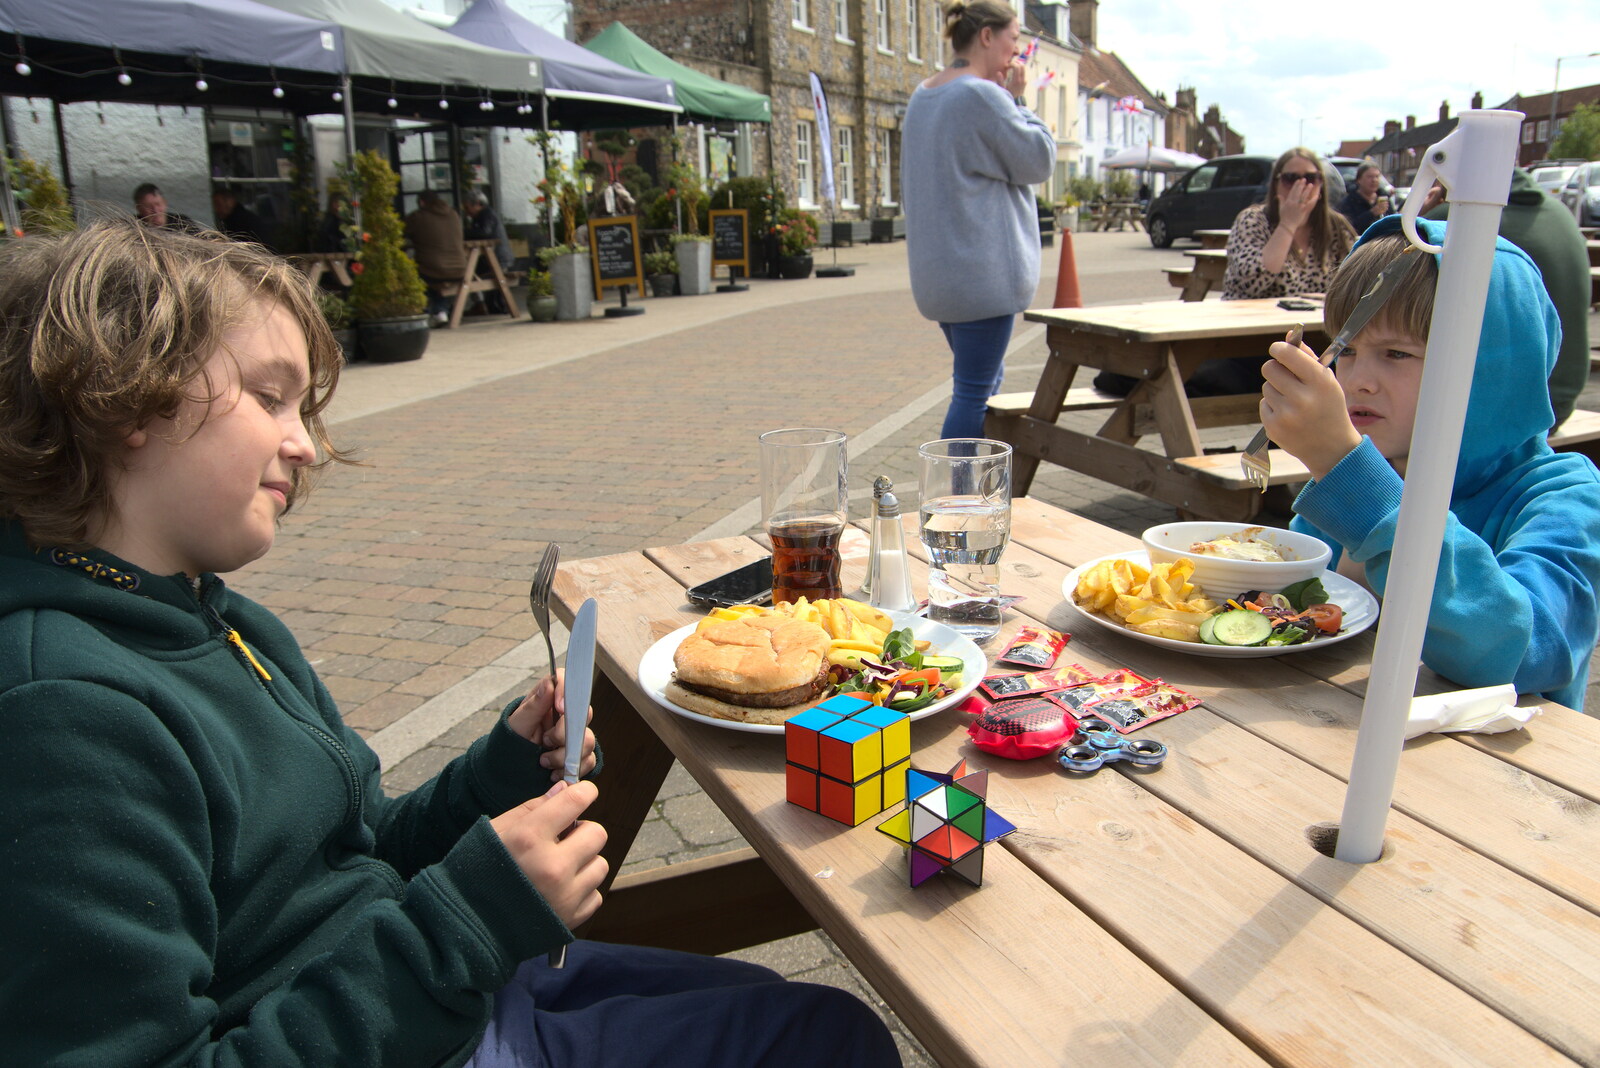 Lunch arrives at the Red Lion from A Vaccination Afternoon, Swaffham, Norfolk - 9th May 2021